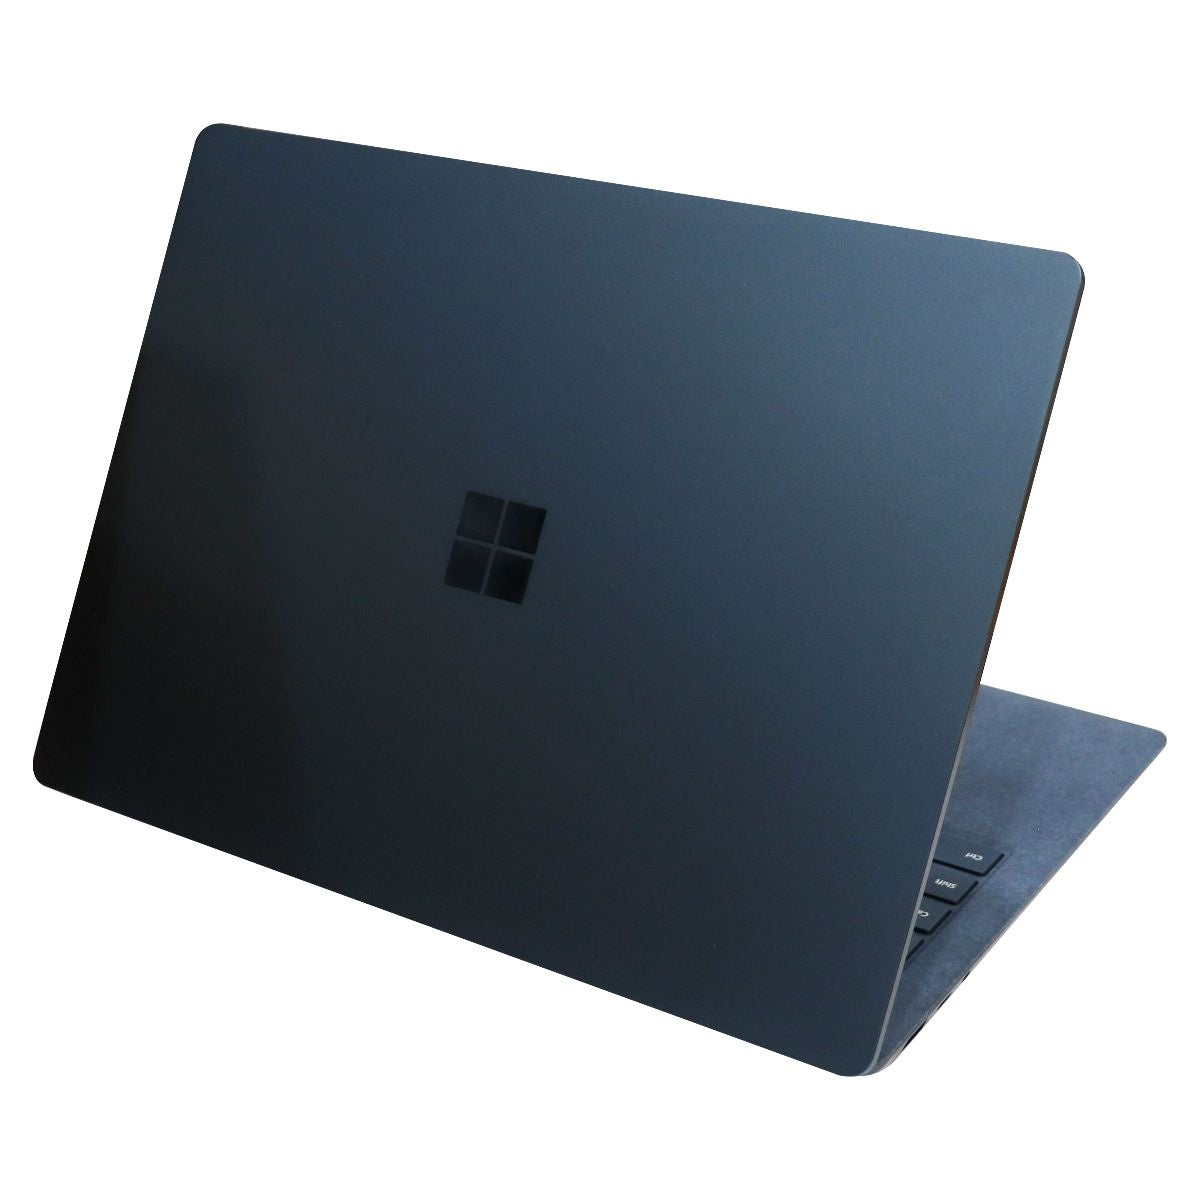 Microsoft Surface Laptop 3 (13.5-in) Intel i5-1035G7 / 8GB/256GB SSD - Blue Laptops - PC Laptops & Netbooks Microsoft    - Simple Cell Bulk Wholesale Pricing - USA Seller